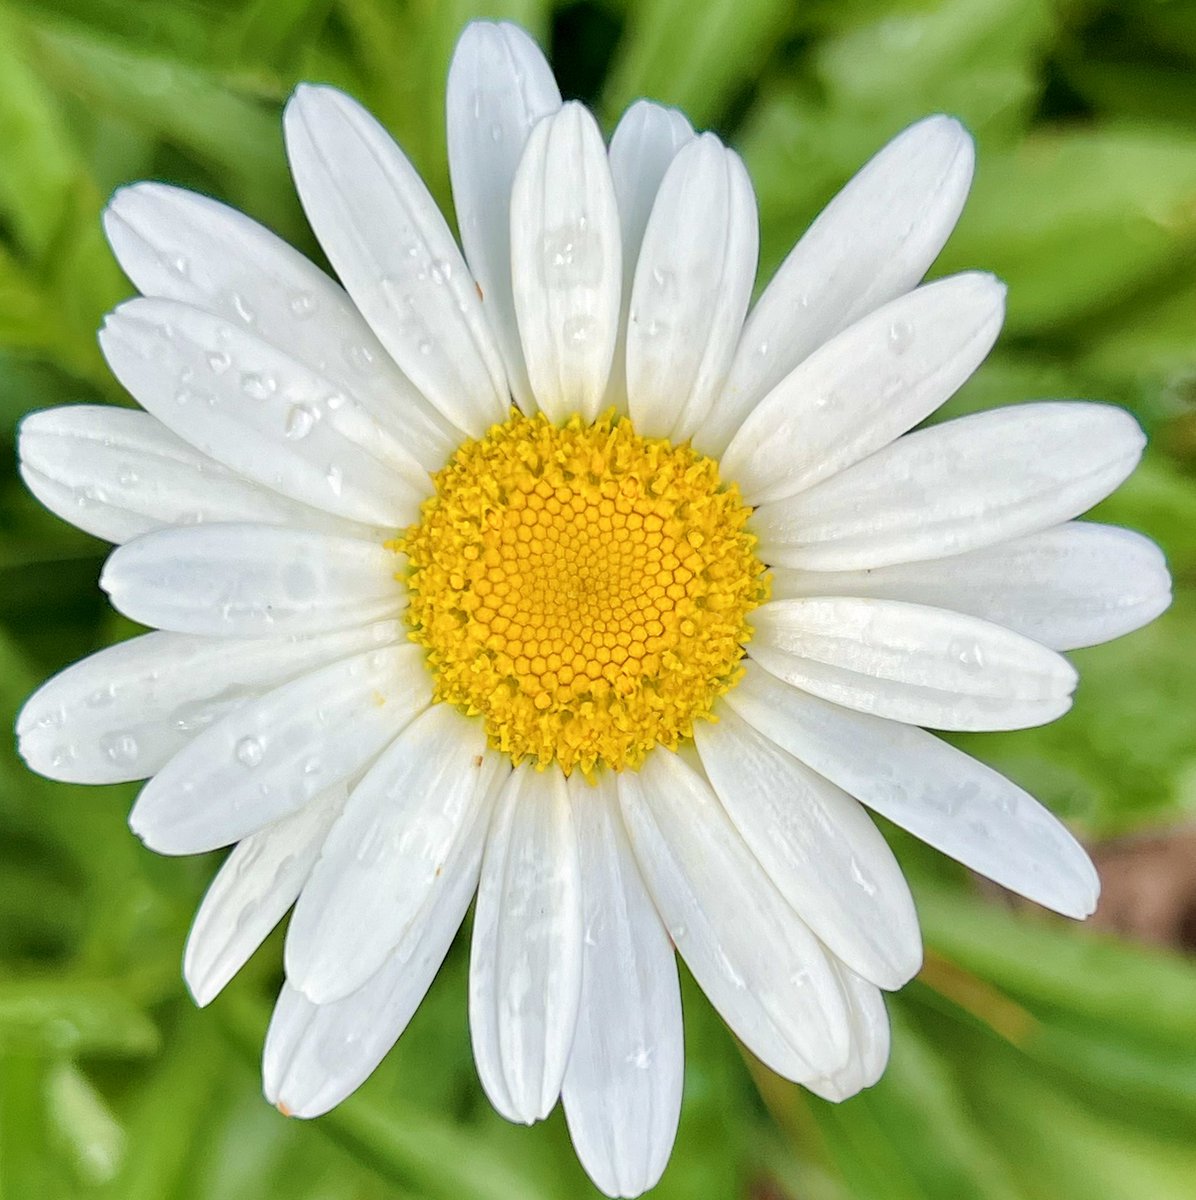 Daisy - Most Common Flower